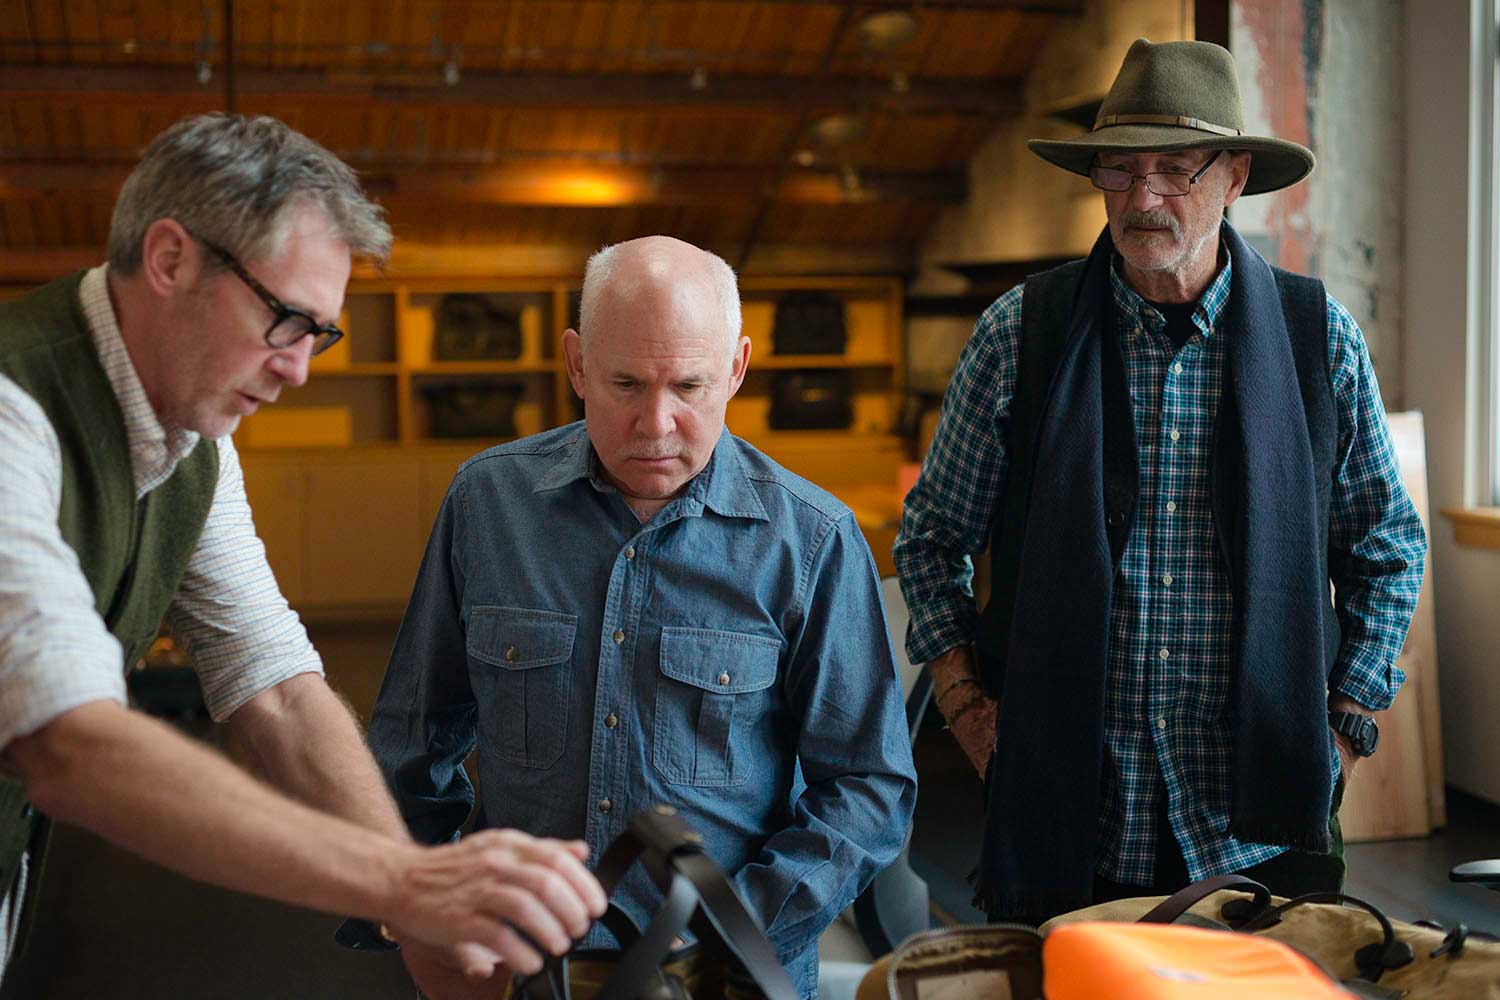 (L to R) CEO Alan Kirk and Magnum photographers Steve McCurry and David Alan Harvey at the headquarters in Seattle during the initial design process for the new line of camera bags being launched on May 1, 2014. (Filson)